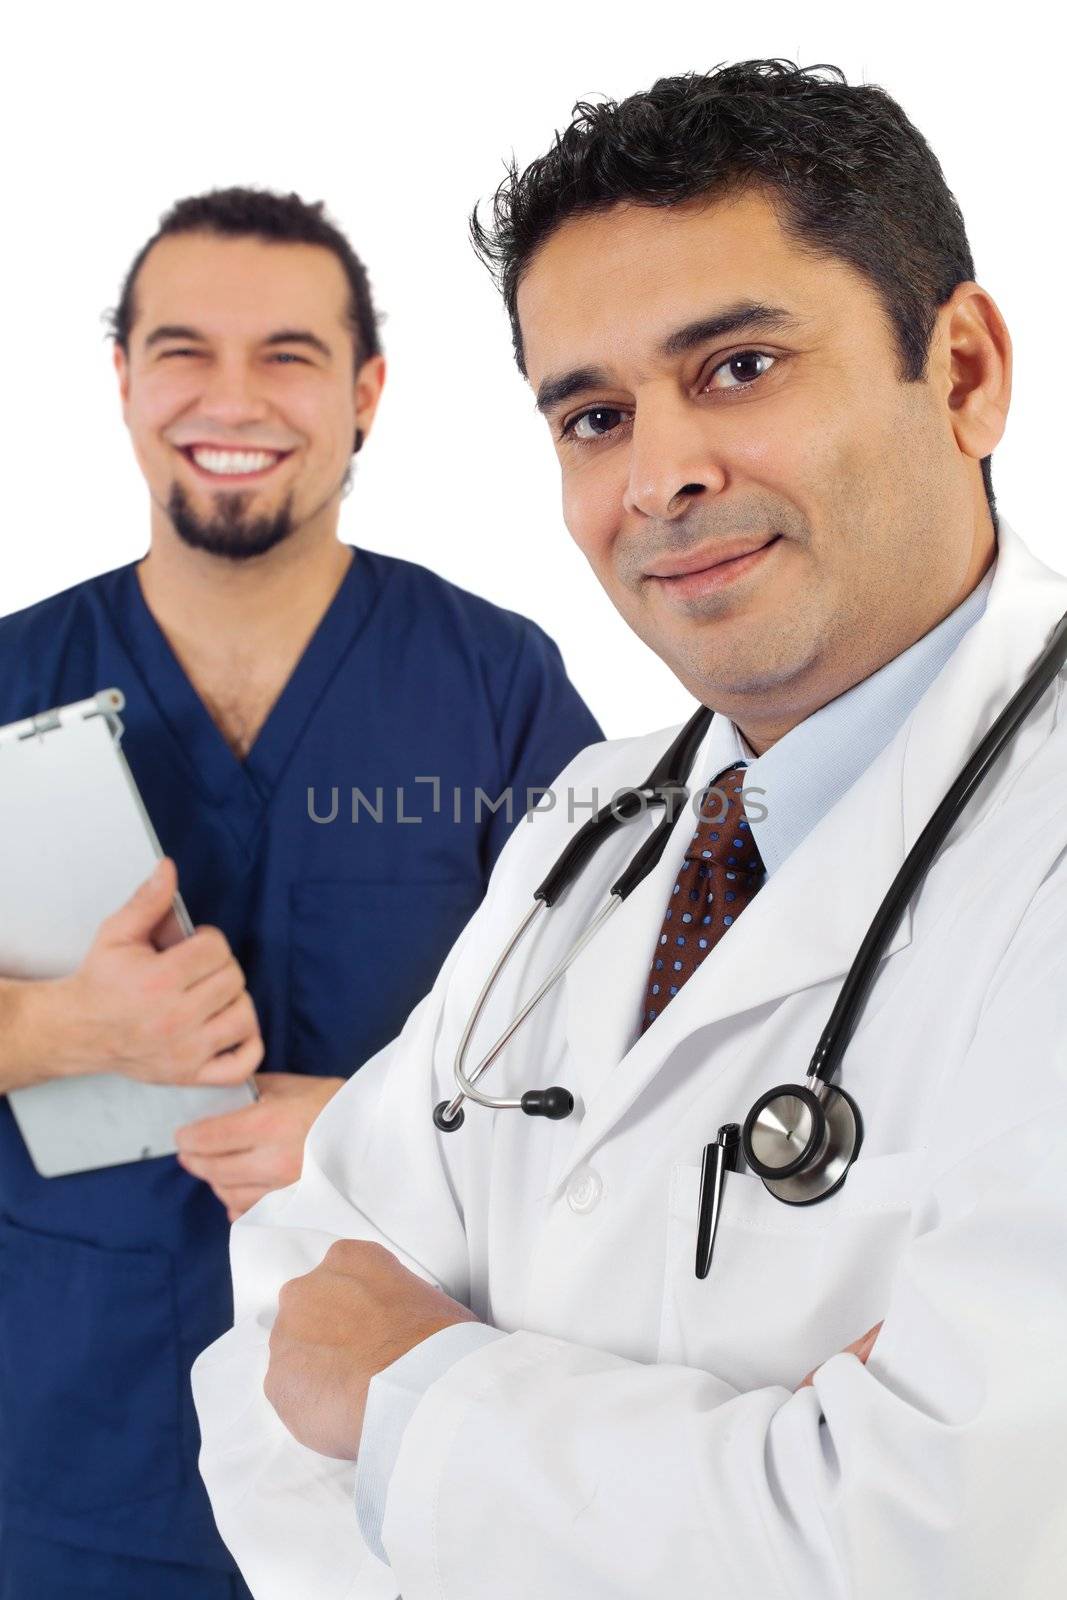 Photo of two doctors standing together smiling. Focus is on doctor on right.